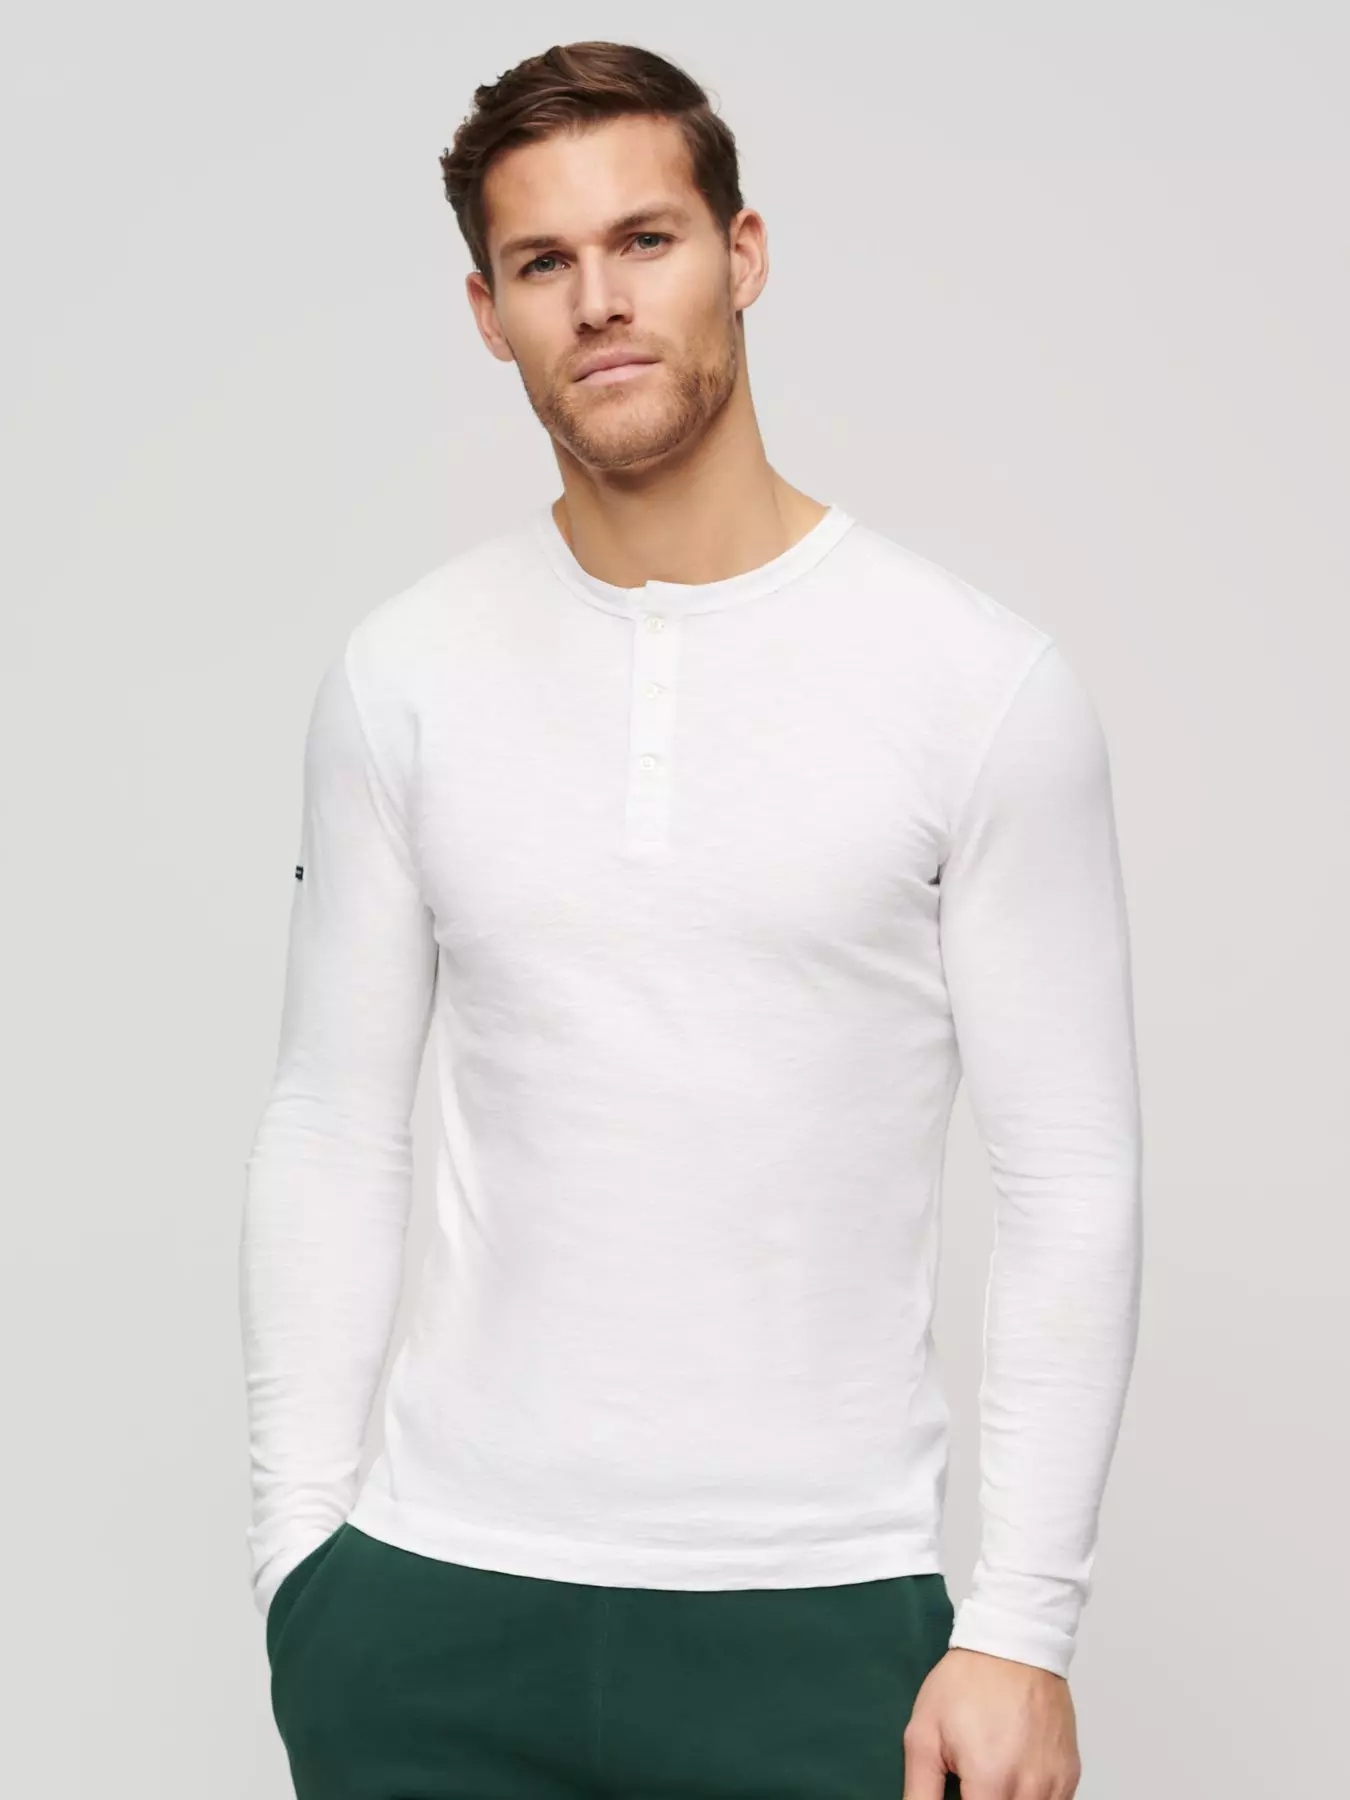 Superdry Sports Athletic Top Long Sleeve T-Shirt White